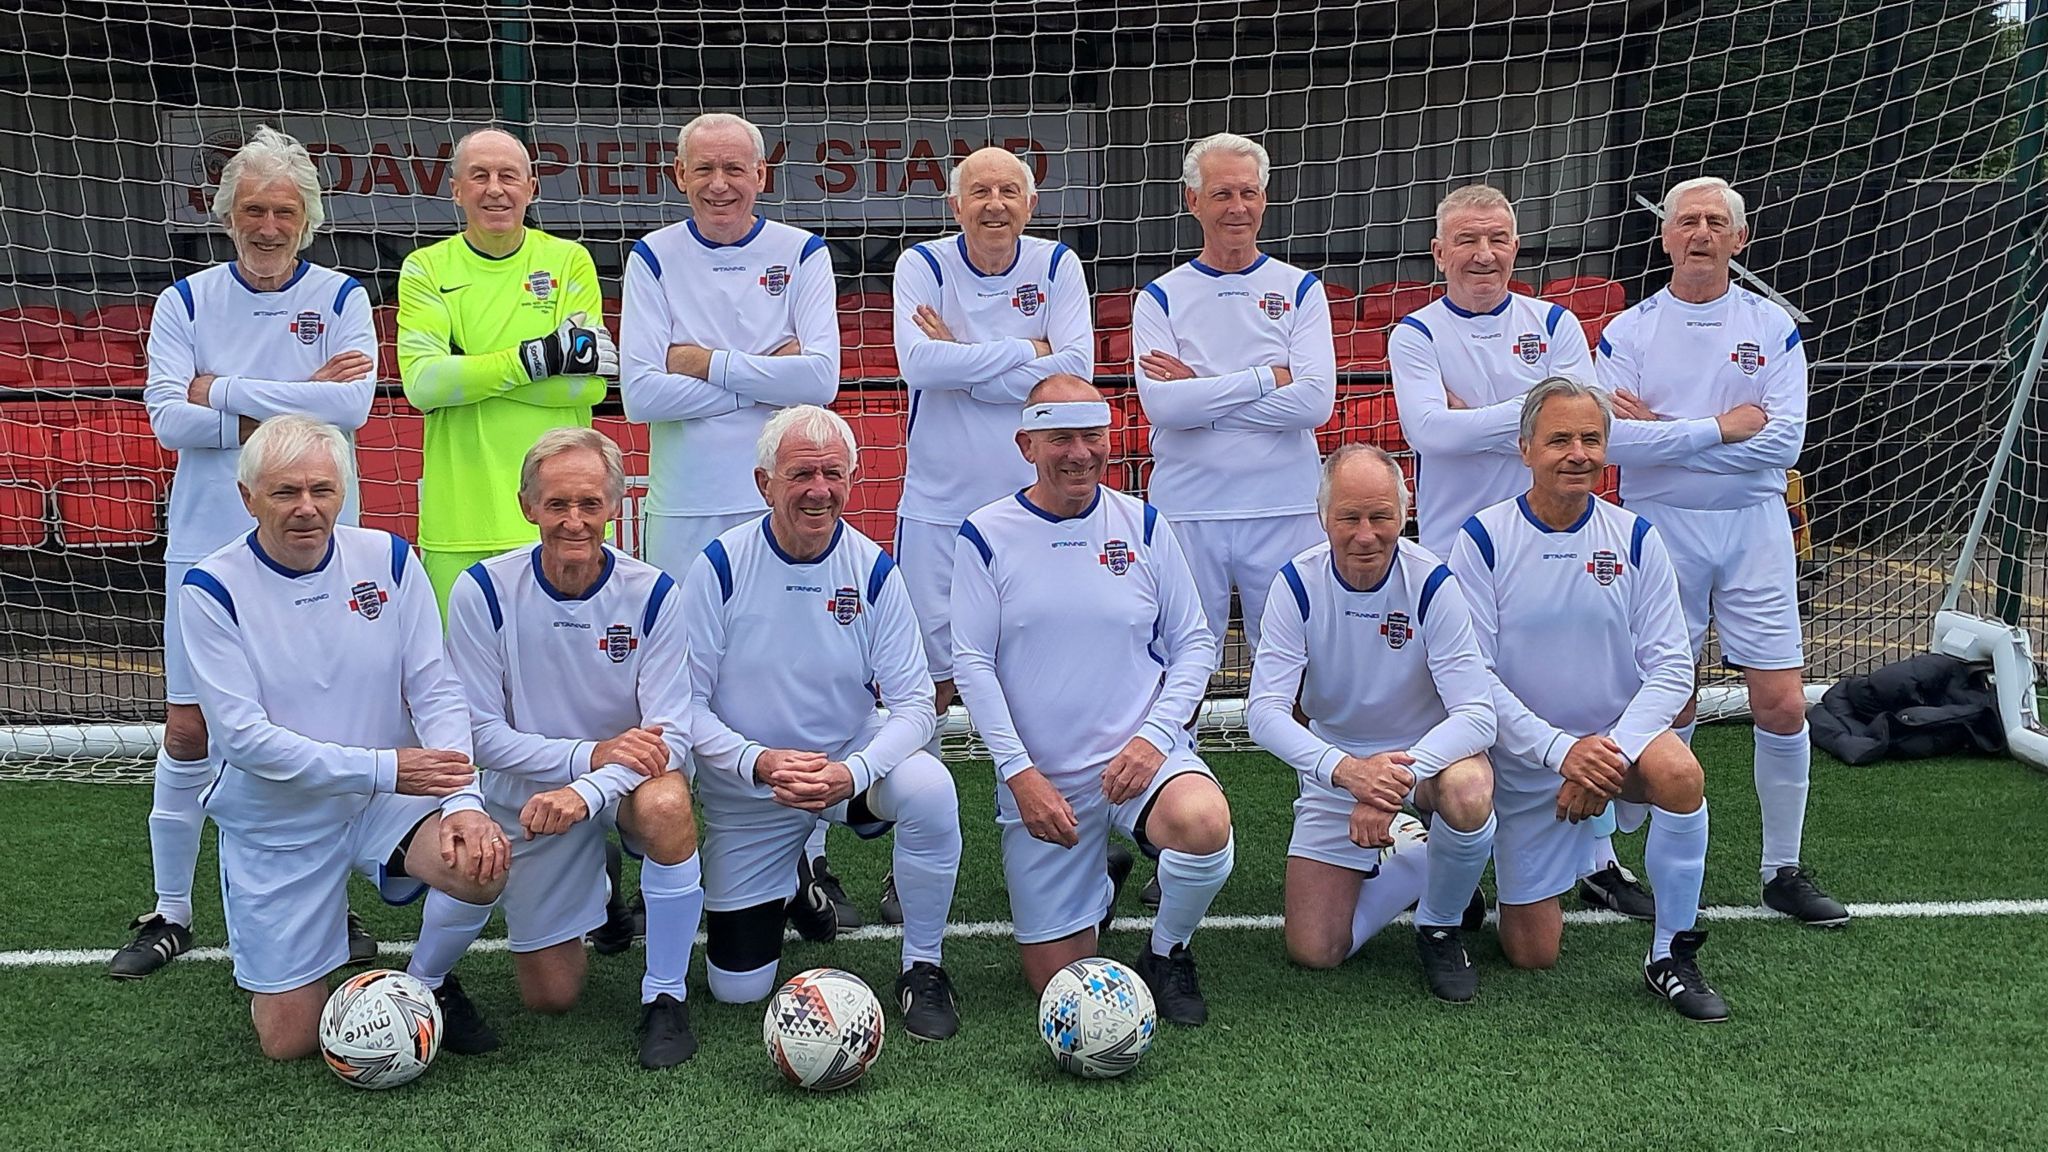 England Over 75s Football squad photograph in front of football goal